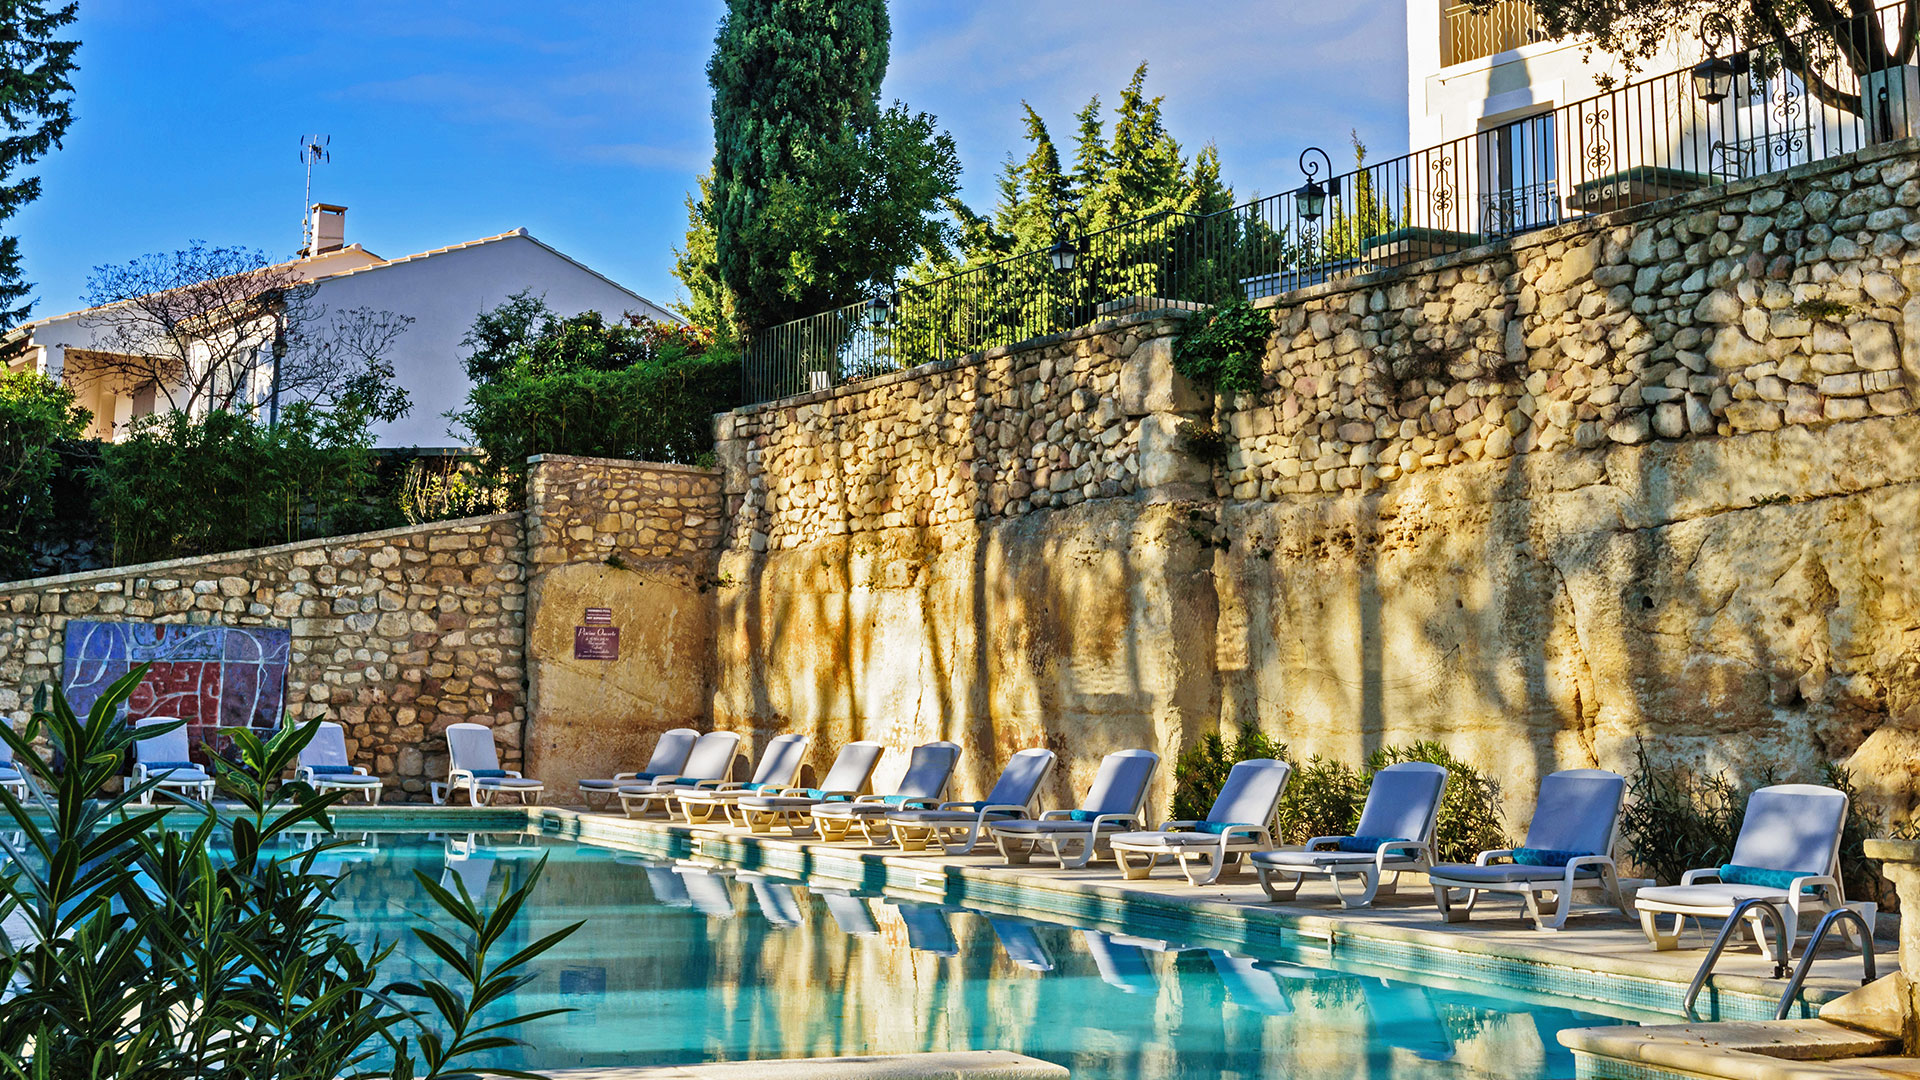 Swimming pool of the Belesso hotel, weekend in Provence